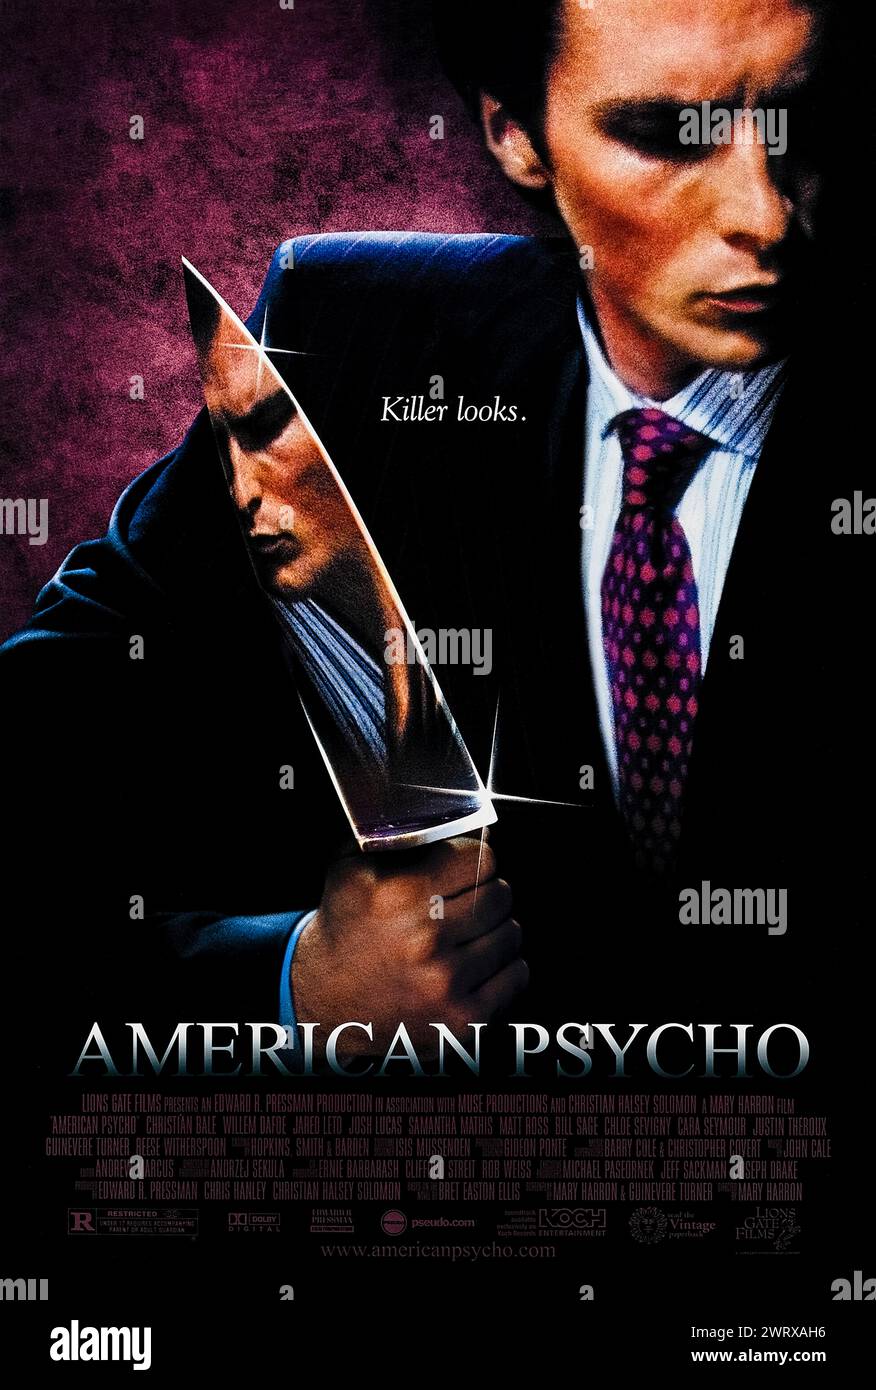 American Psycho (2000) directed by Mary Harron and starring Christian Bale, Justin Theroux and Josh Lucas. Fantasic big screen adaptation of Bret Easton Ellis' controversial novel about successful banker Patrick Bateman, who's good taste and looks hide his psychopathic ego and propensity for extreme violence. US one sheet poster ***EDITORIAL USE ONLY***. Credit: BFA / Lionsgate Stock Photo